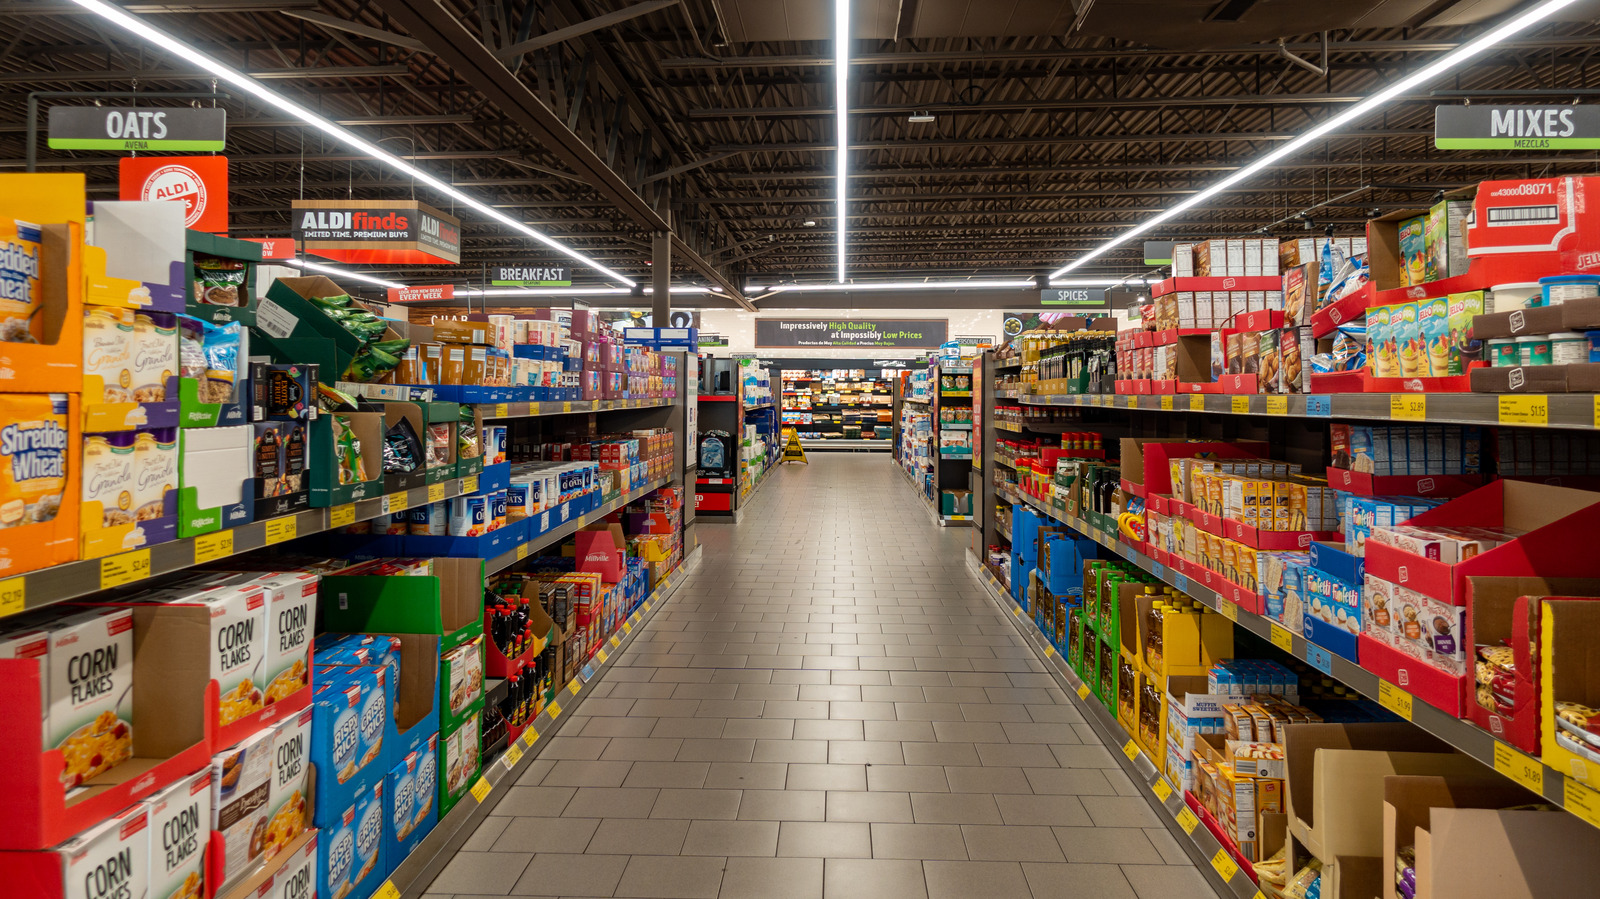 How Aldi's Food Displays Help Keep Costs Down And Customer Service Up